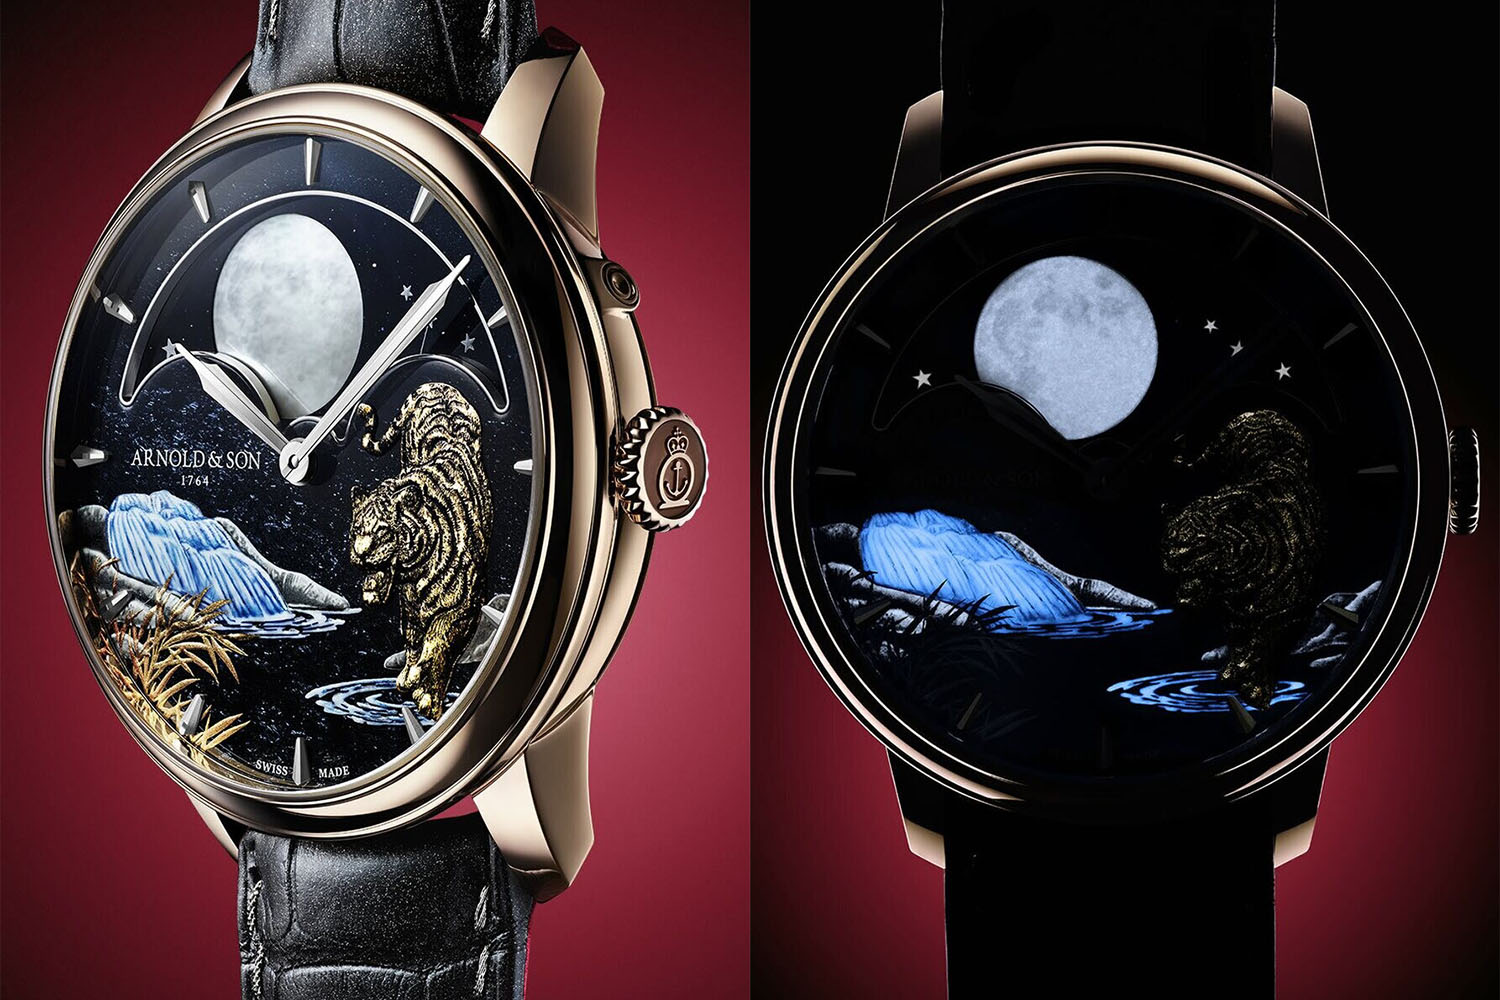 an exquisite timepiece featuring a glow-in-the-dark moon and tiger face.